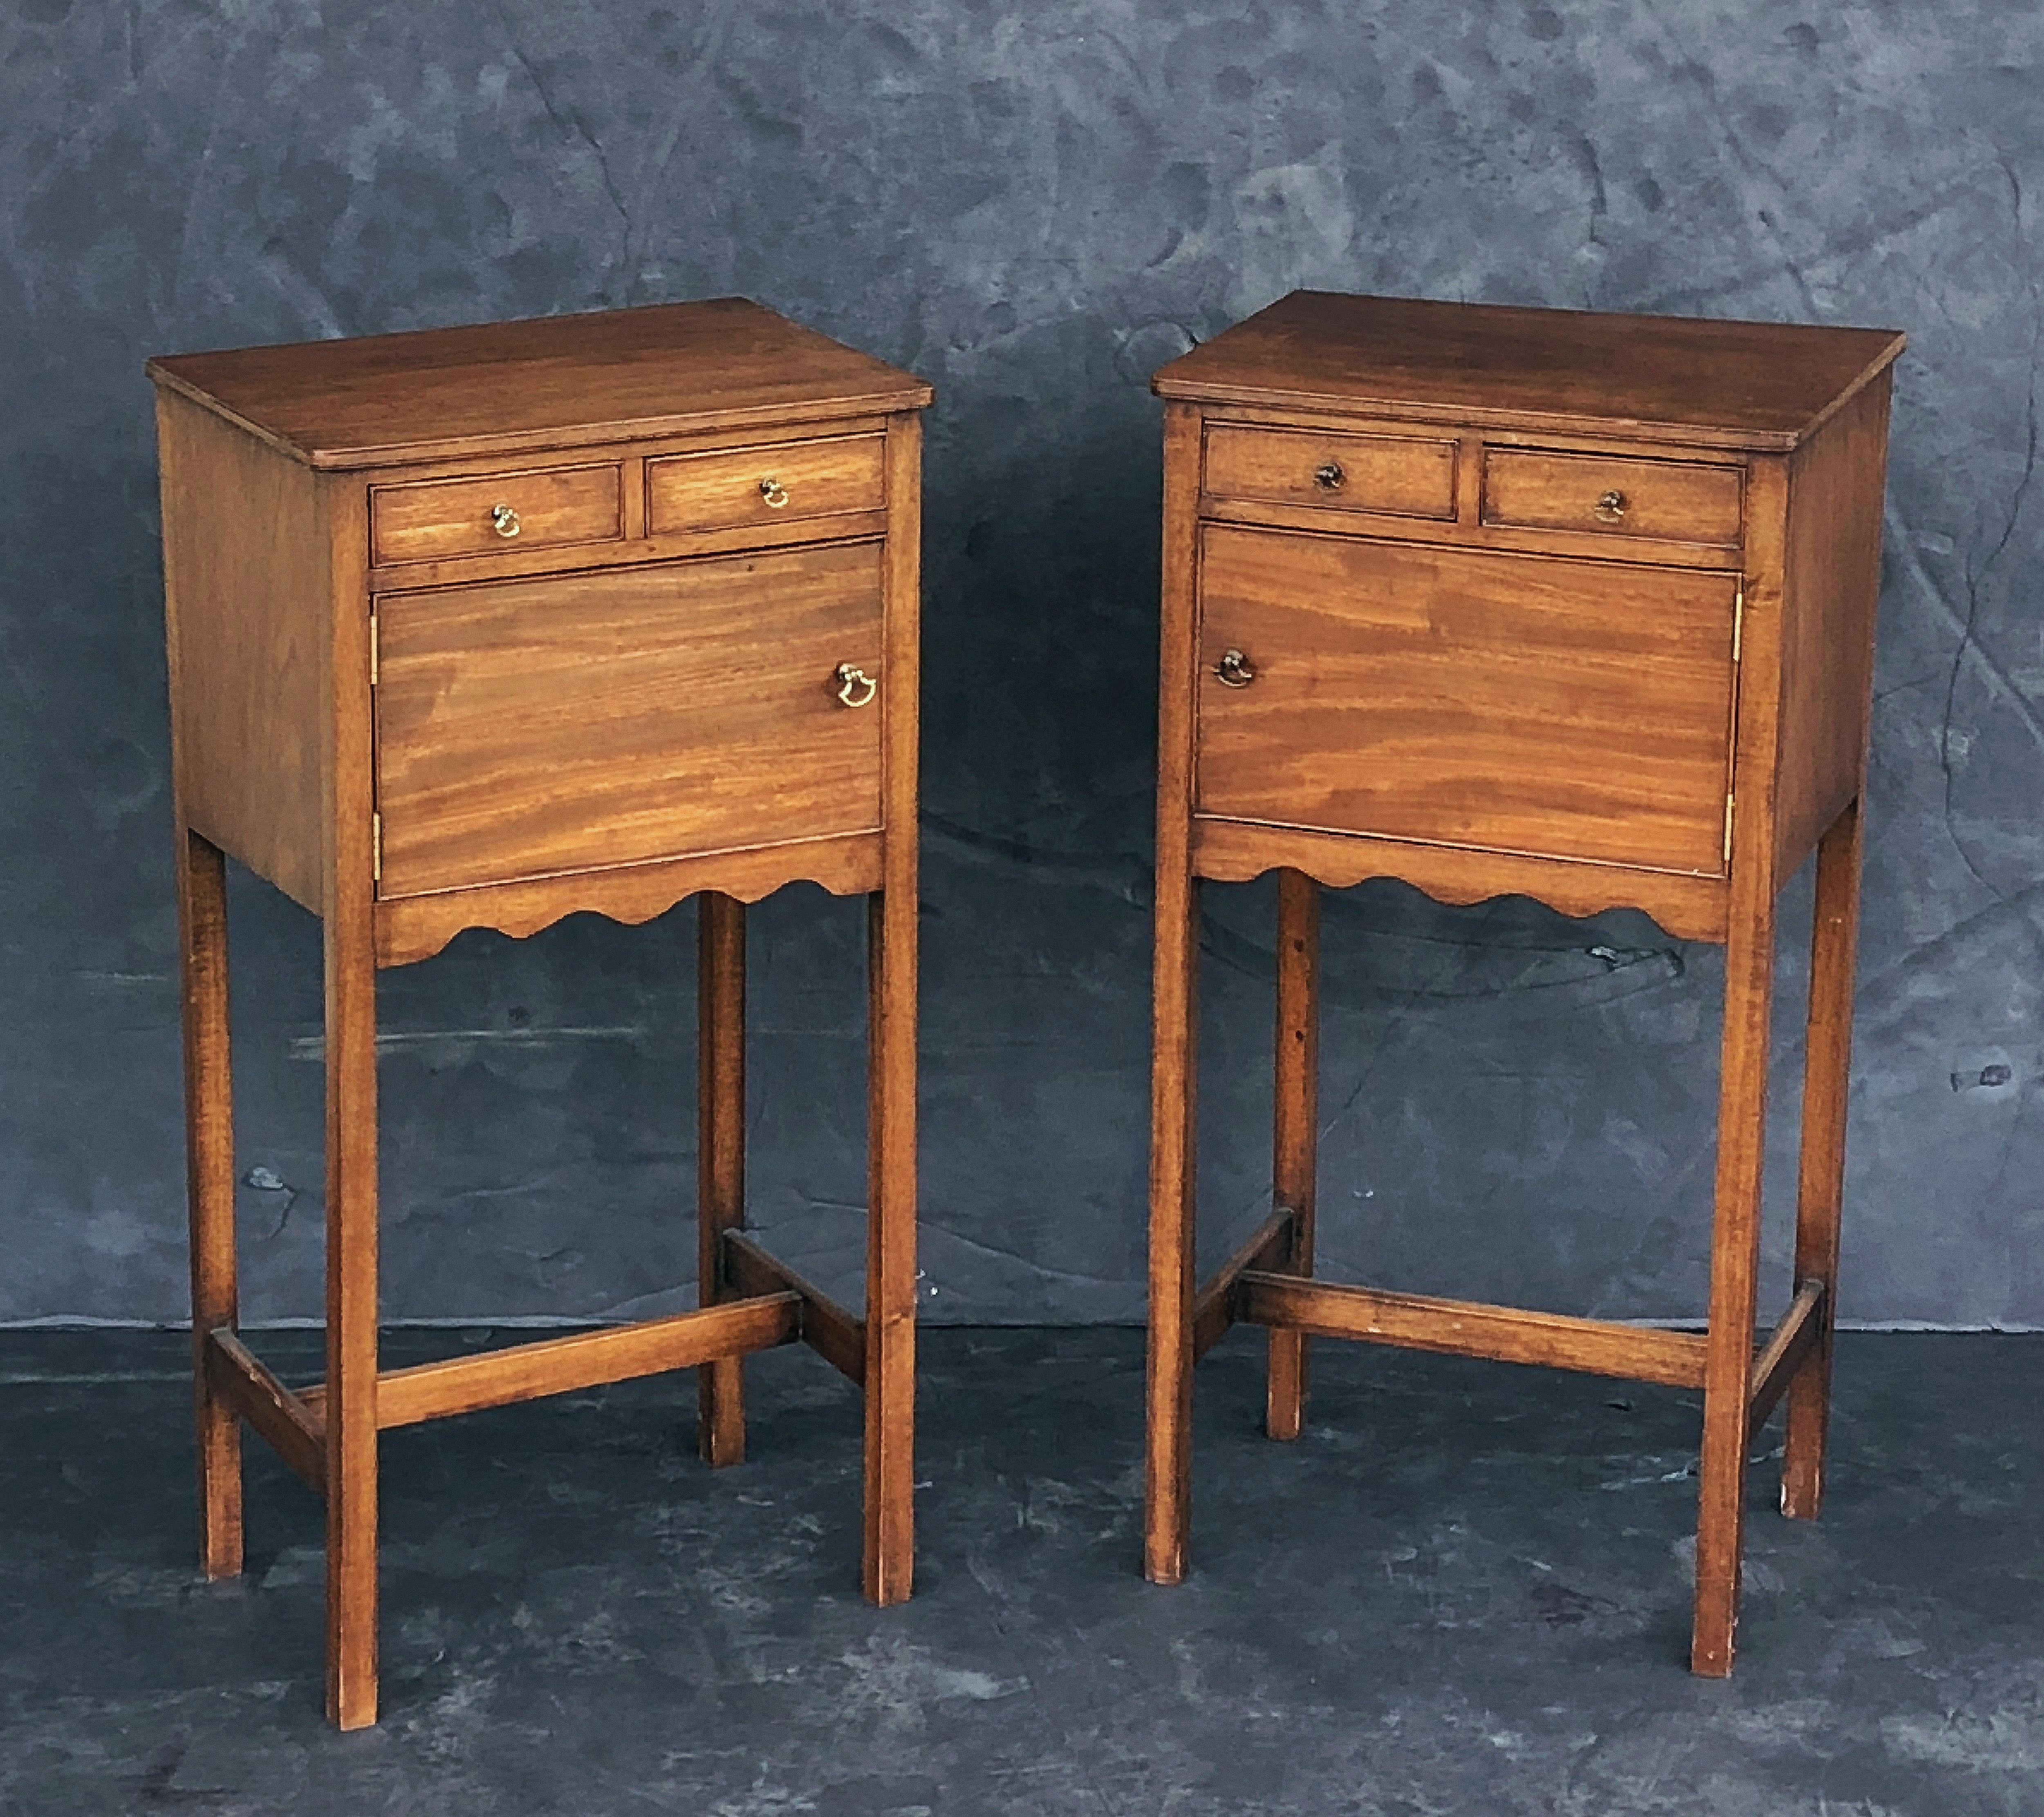 20th Century English Georgian Style Nightstands or Bedside Cabinets  'Priced as Pair'